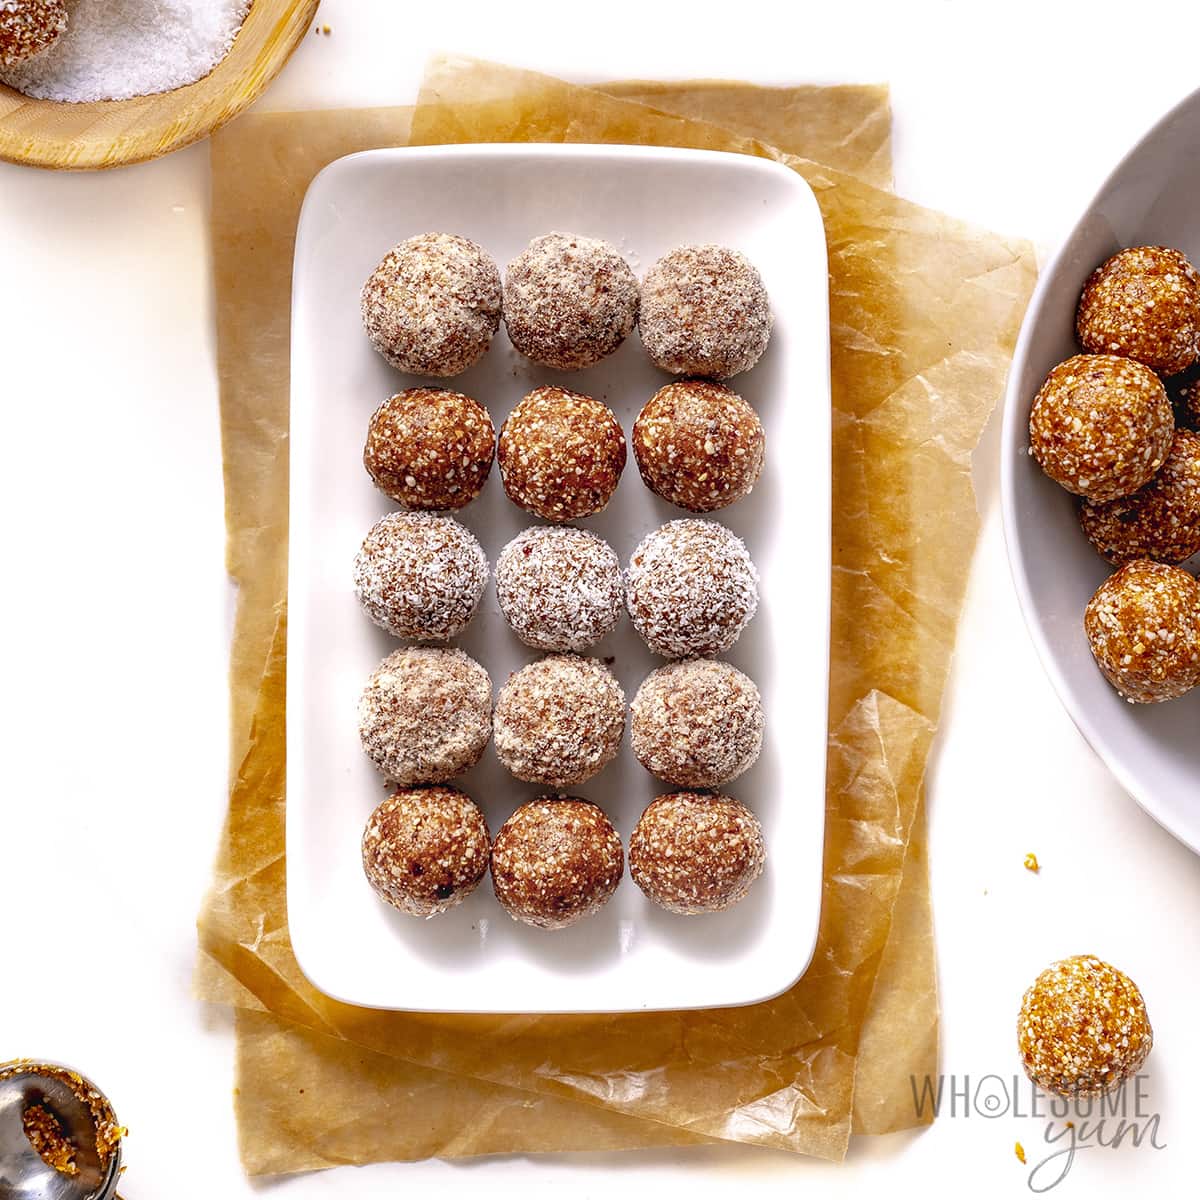 Bliss balls rolled in coconut and almond flour.